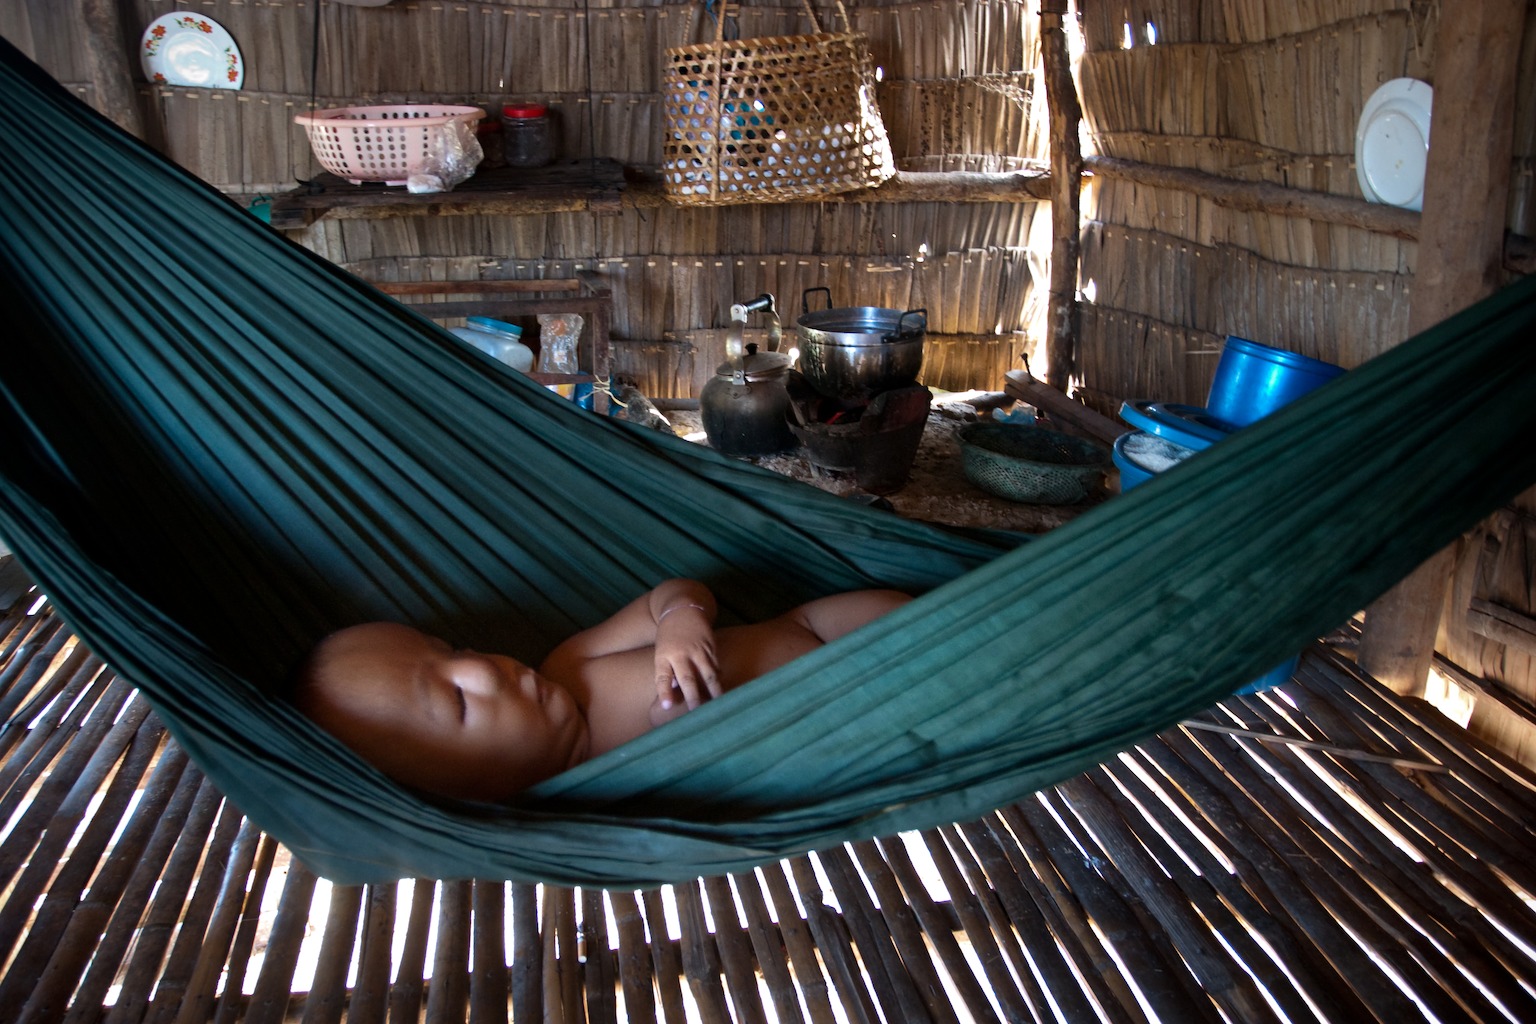 Phirum, 5, Third generation Agent Orange victim, naps in a hammock at home in Beng Melea Province, Seim Reap Cambodia. Most of his days are spent with his mother pan handling at the Angkor Wat Temples. Phirum Ung was born in south eastern Cambodia, where thousands of acres were sprayed with a chemical herbicide dioxin coded {quote}Agent Orange{quote}.